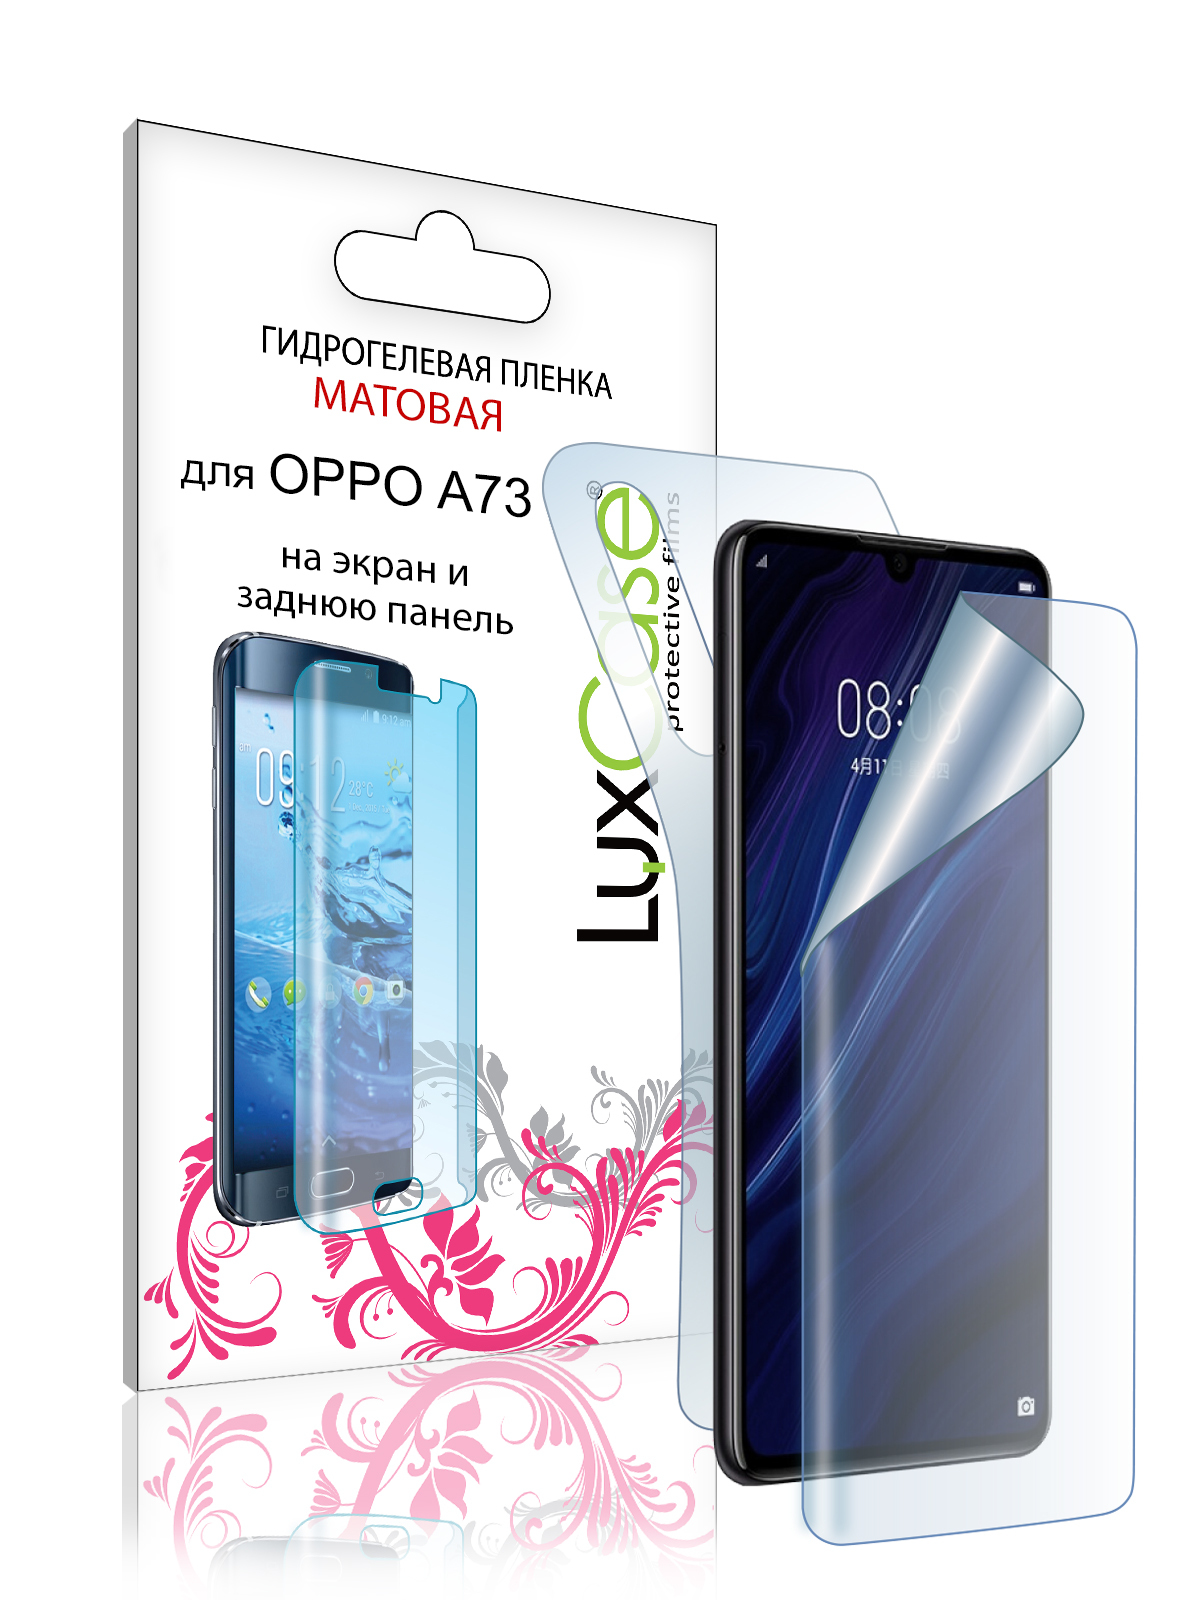 Гидрогелевая пленка LuxCase для Oppo A73 0.14mm Matte Front and Back 87649 гидрогелевая пленка luxcase для oppo a73 0 14mm matte front and back 87649